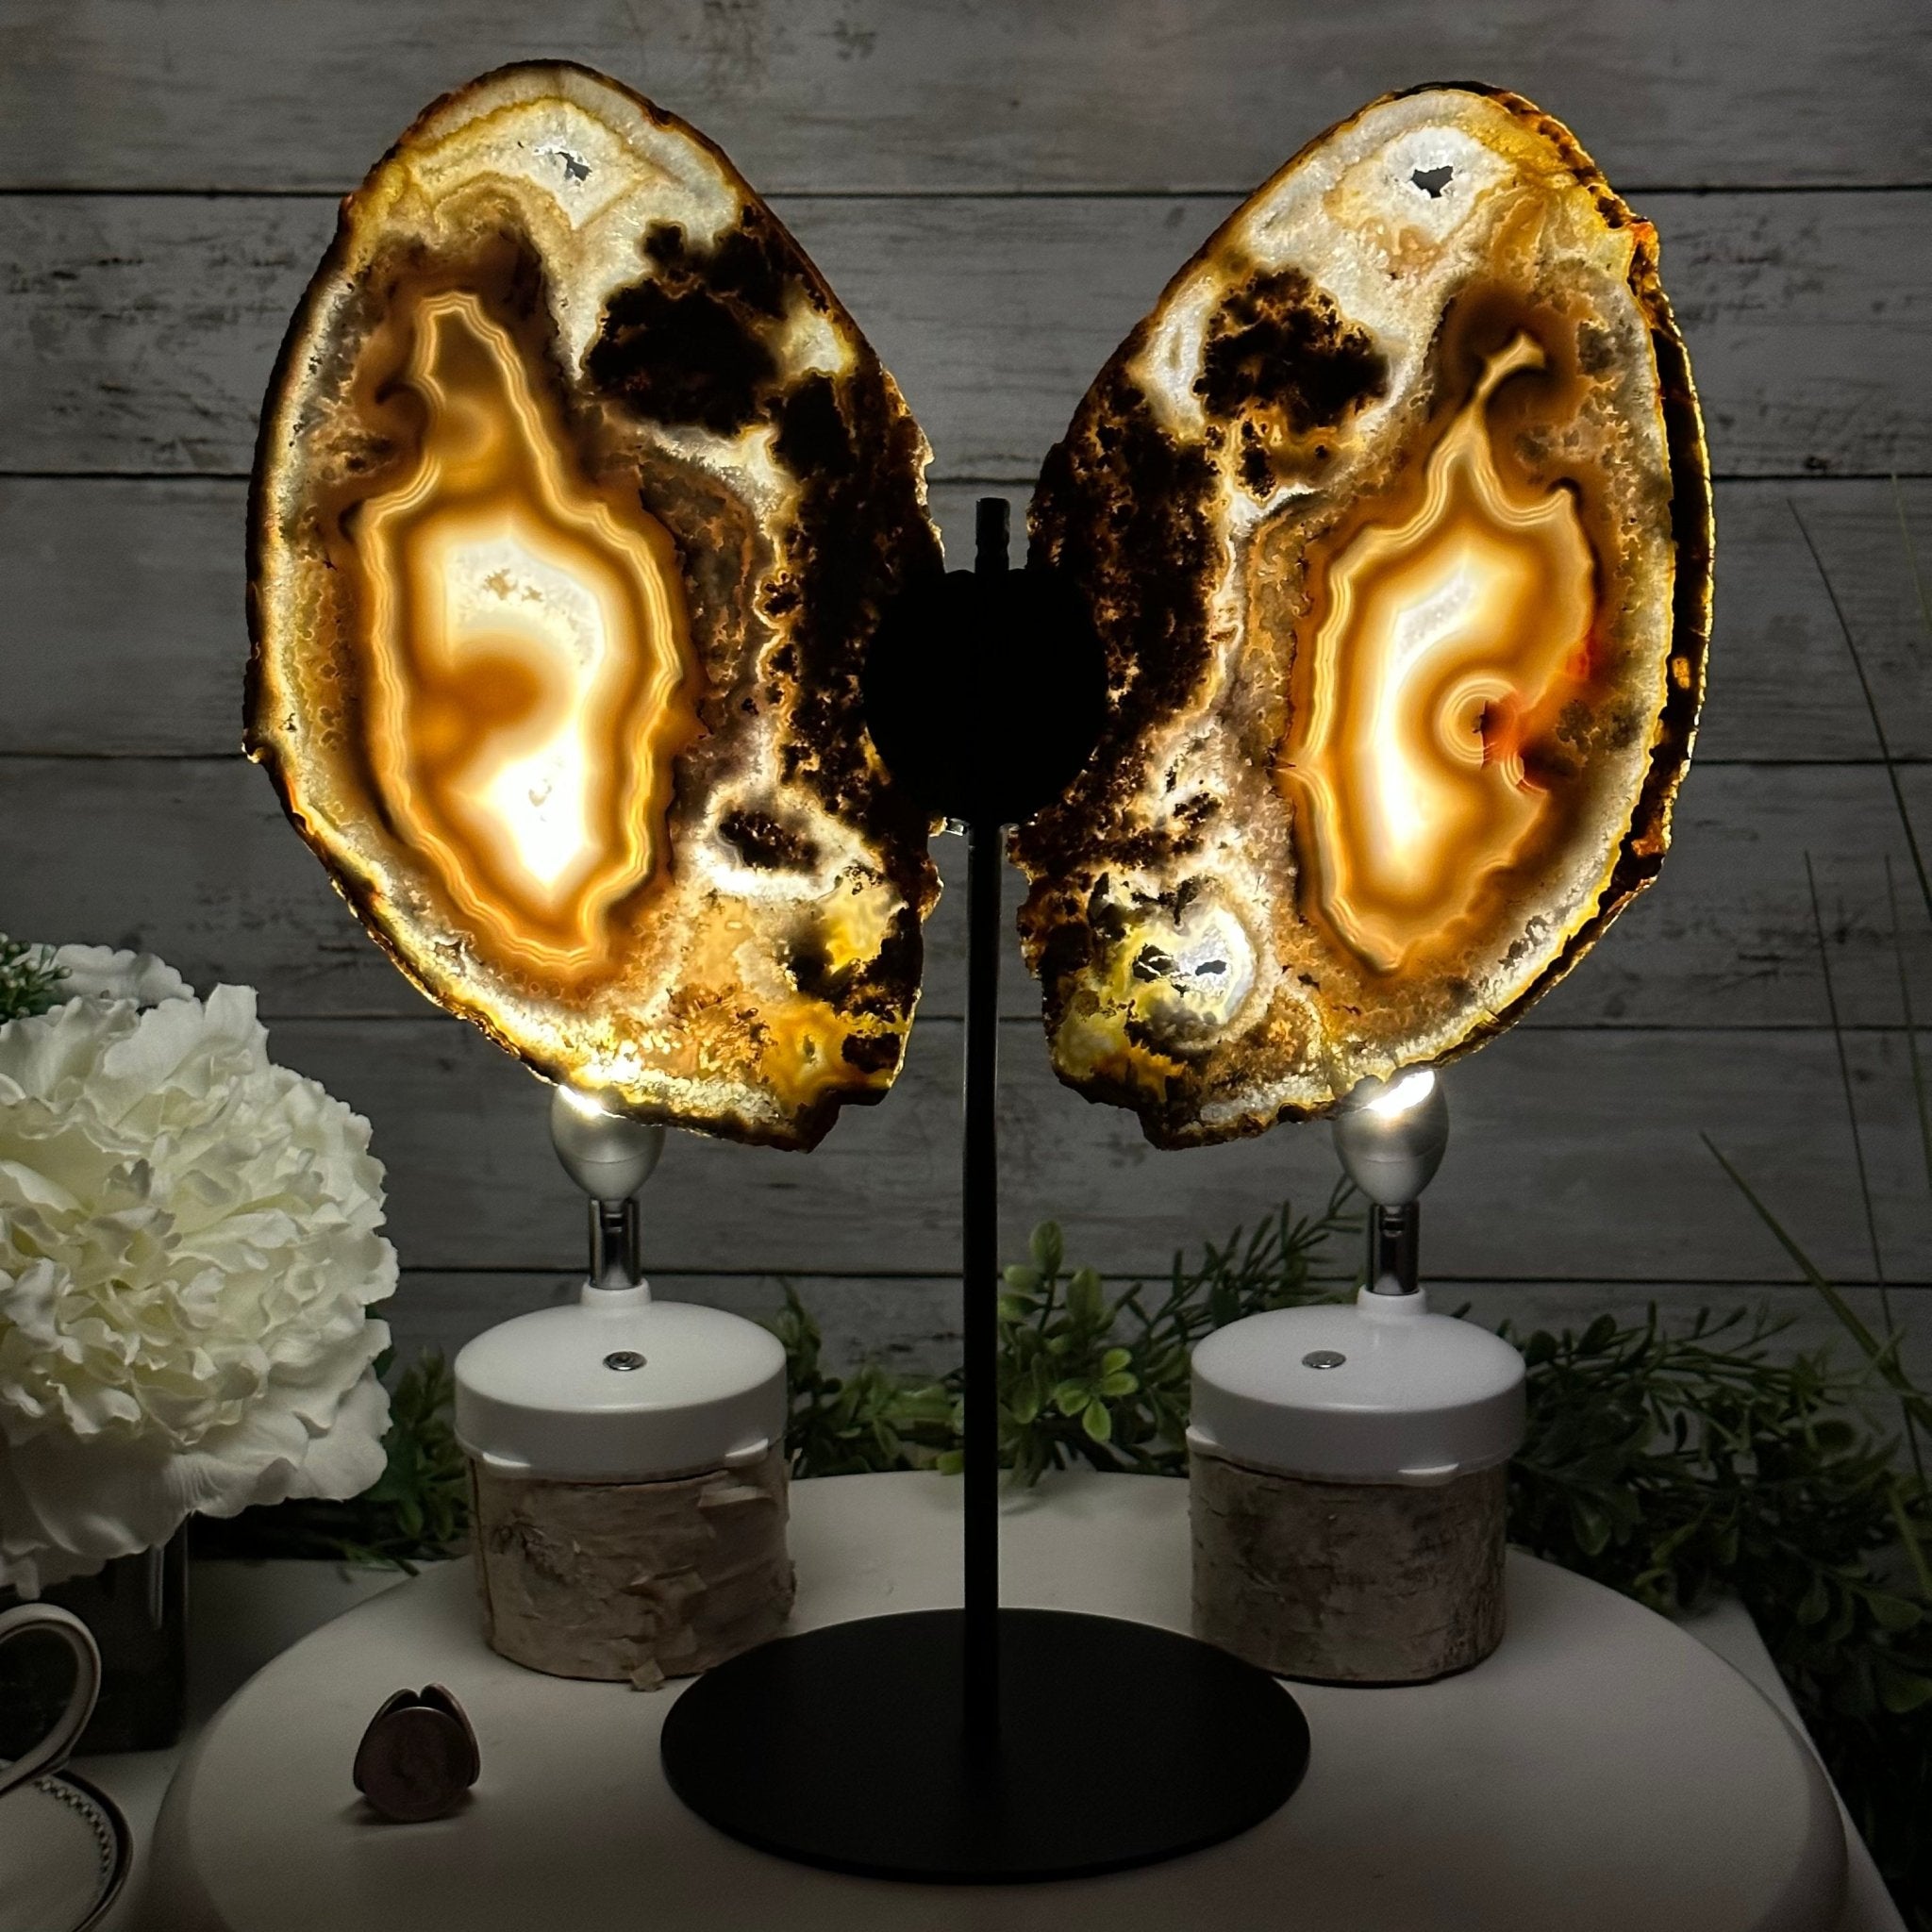 Natural Brazilian Agate "Butterfly Wings", Metal Stand, 15.6" Tall Model #5050NA-088 by Brazil Gems - Brazil GemsBrazil GemsNatural Brazilian Agate "Butterfly Wings", Metal Stand, 15.6" Tall Model #5050NA-088 by Brazil GemsAgate Butterfly Wings5050NA-088